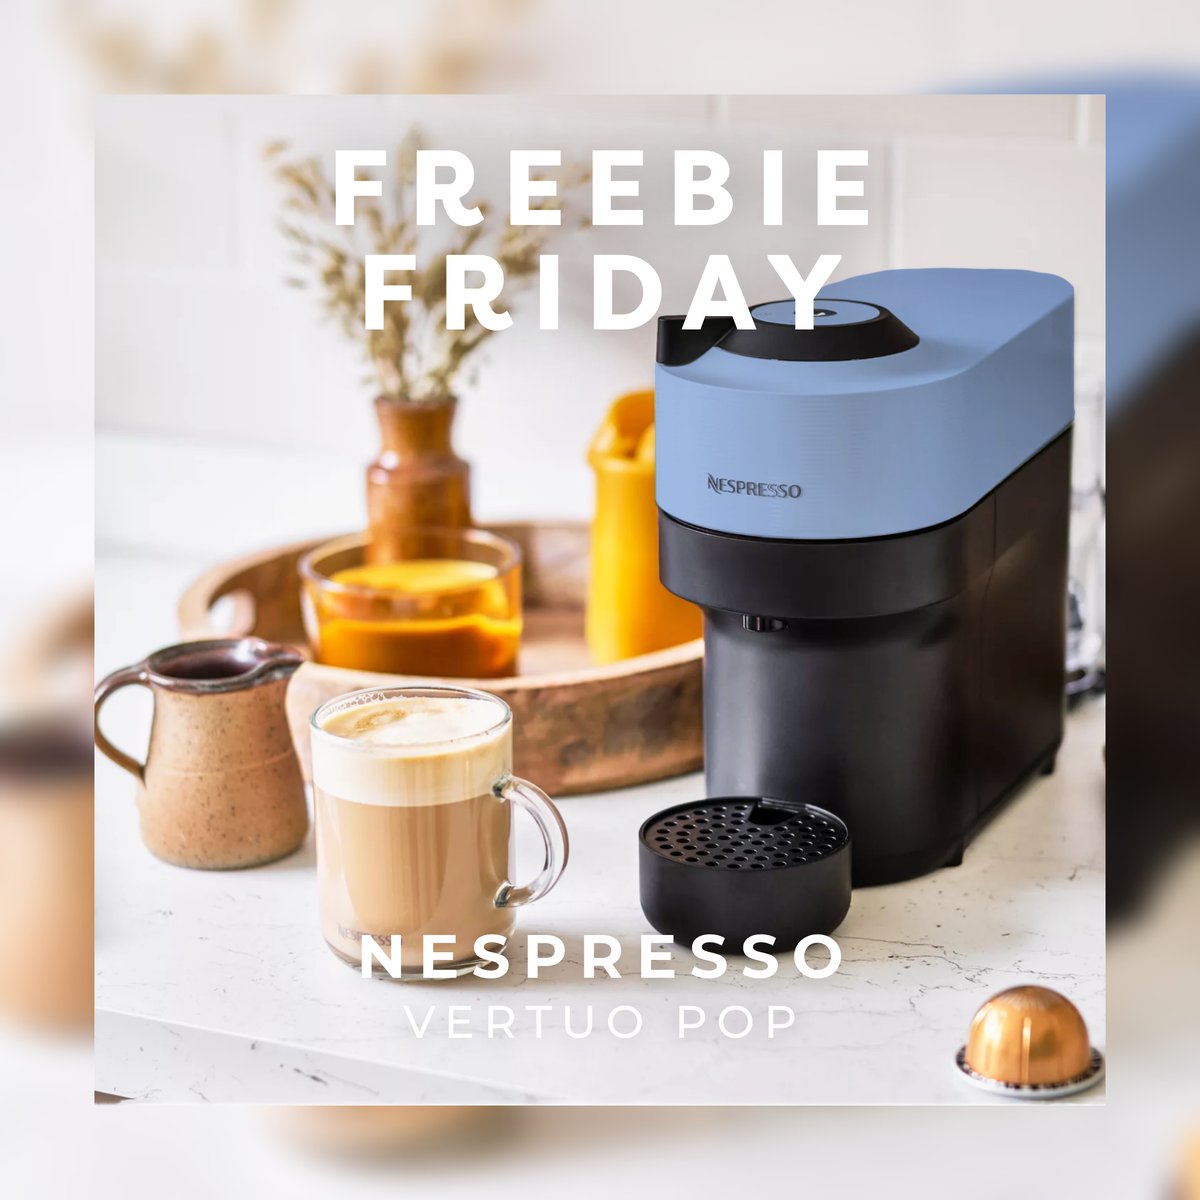 It's Freebie Friday, and we're giving away a sleek Nespresso Vertuo Pop coffee machine in blue!

For your chance to #Win, tag a friend and make sure you are both following @WrenKitchens 
 
Competition closes  *22.05.23*

#freebiefriday #competition #Giveaway #competitionuk #comp